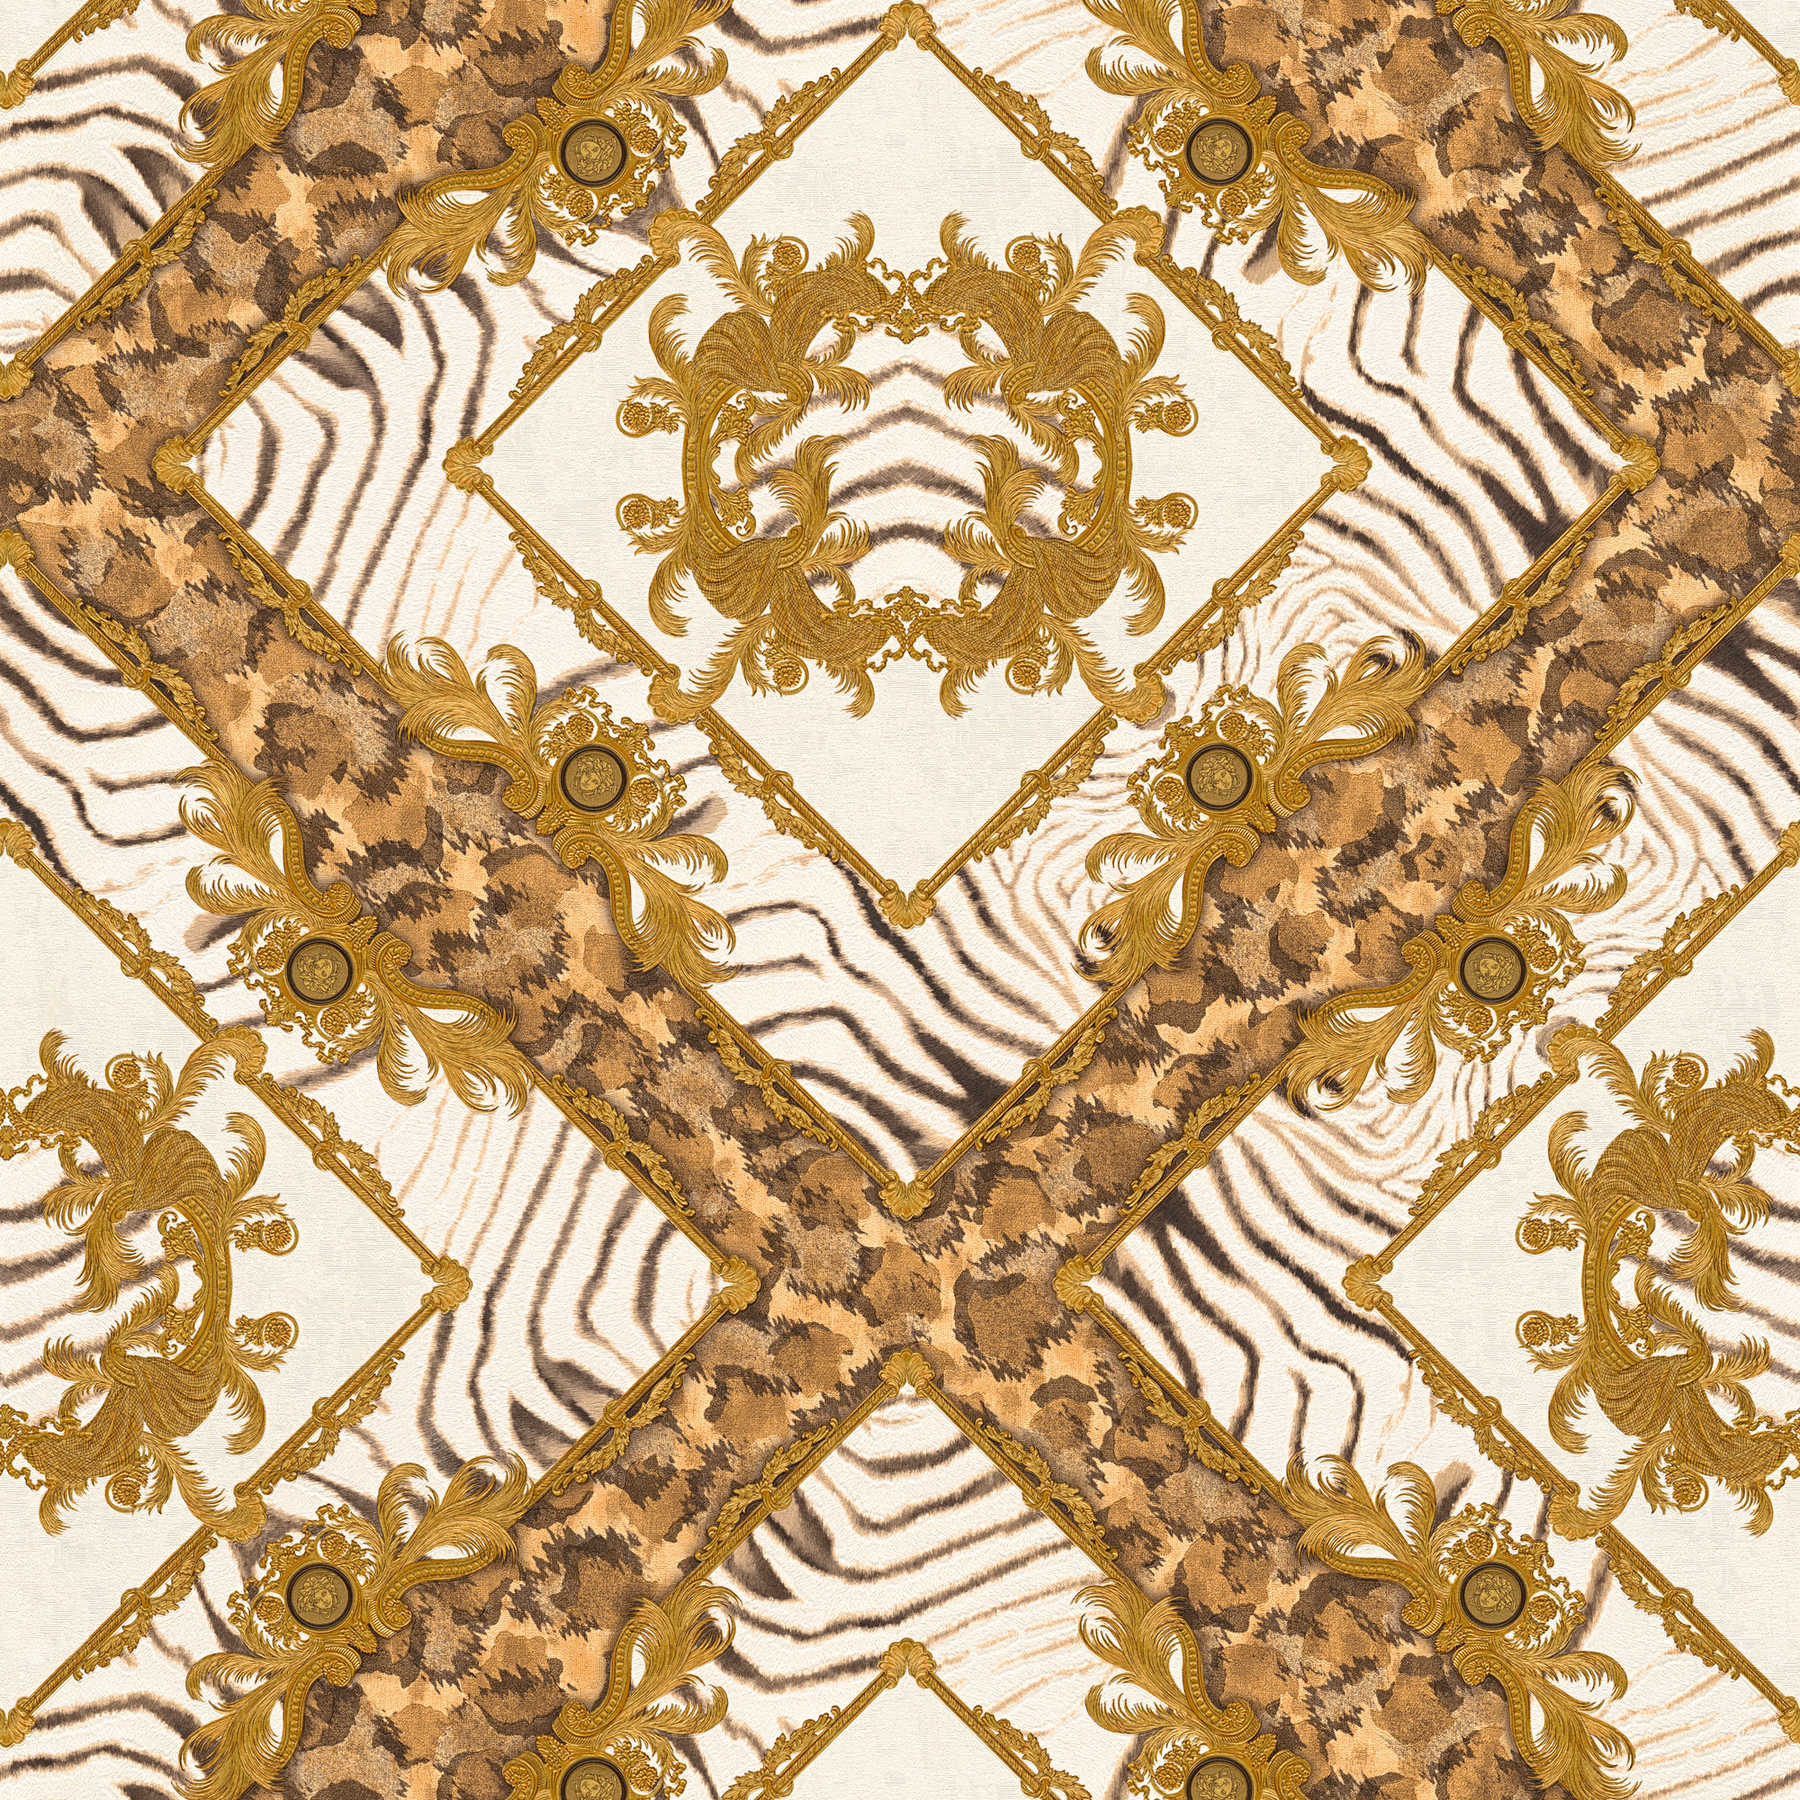         Wallpaper by VERSACE with Animal Print Design - Brown, Cream
    